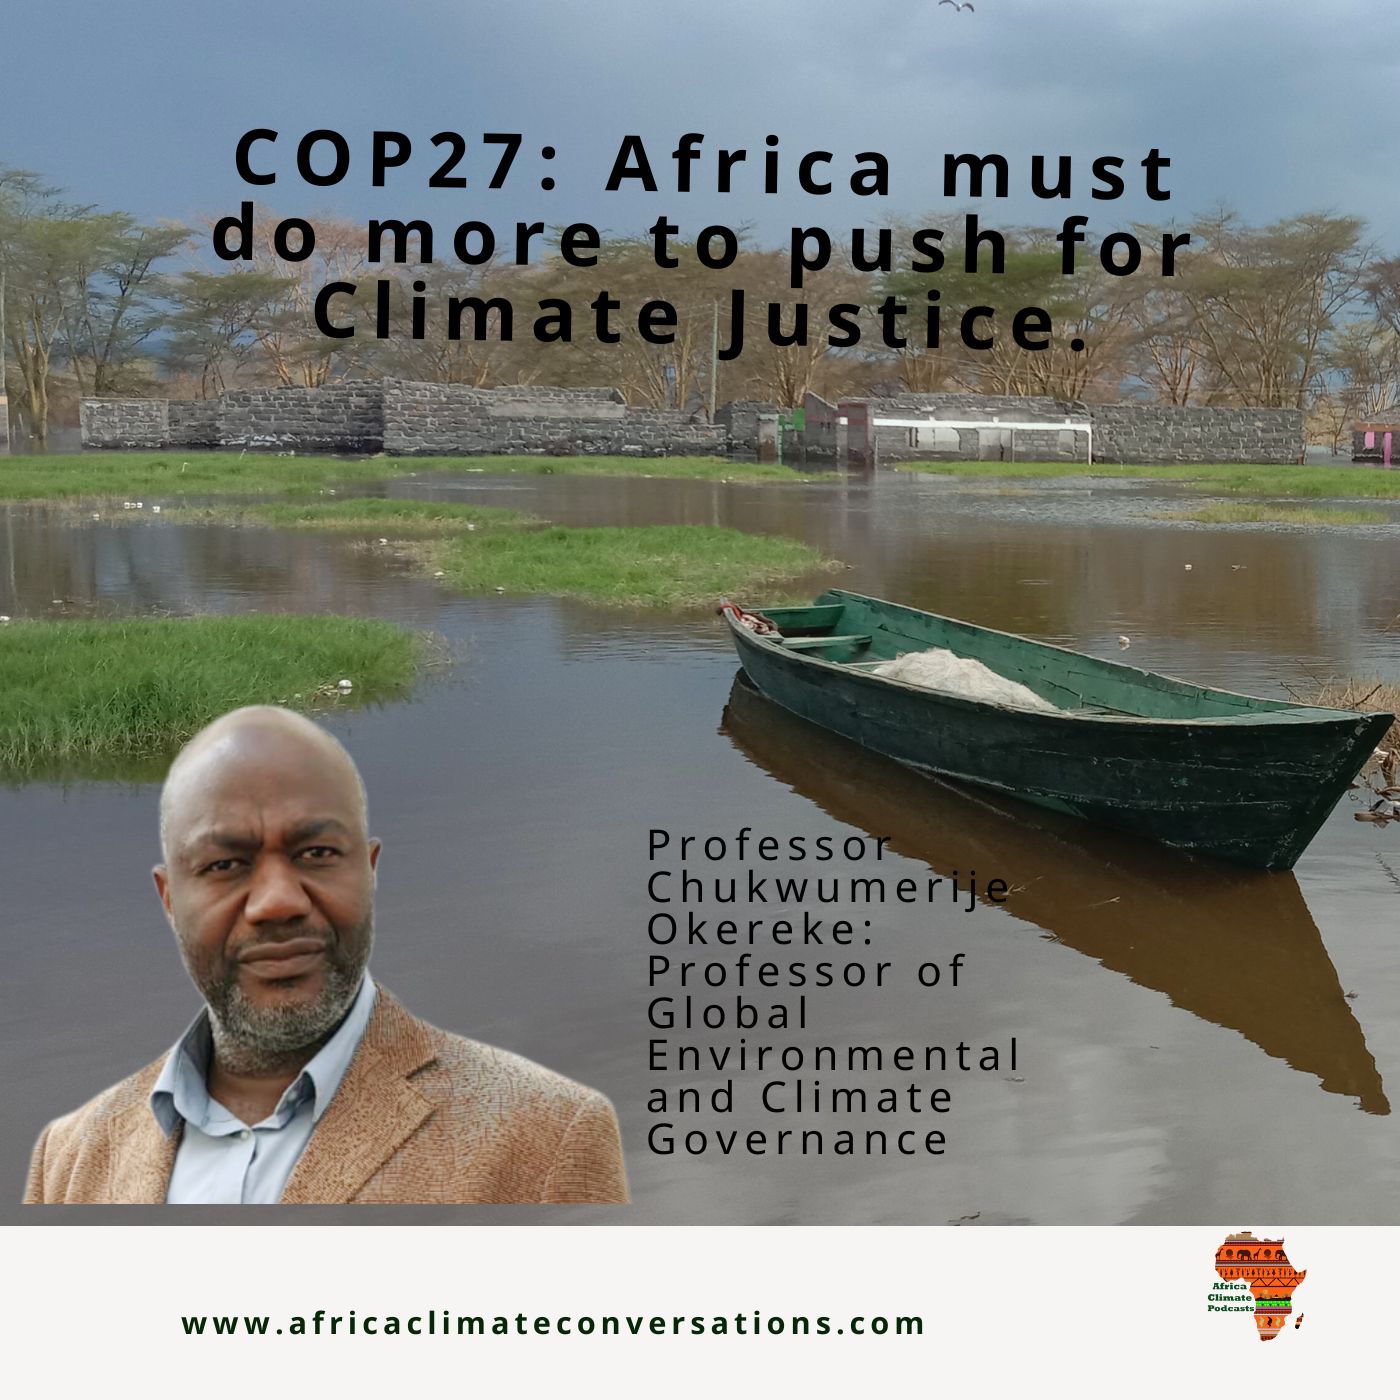 COP27: Africa must do more to push for Climate Justice.